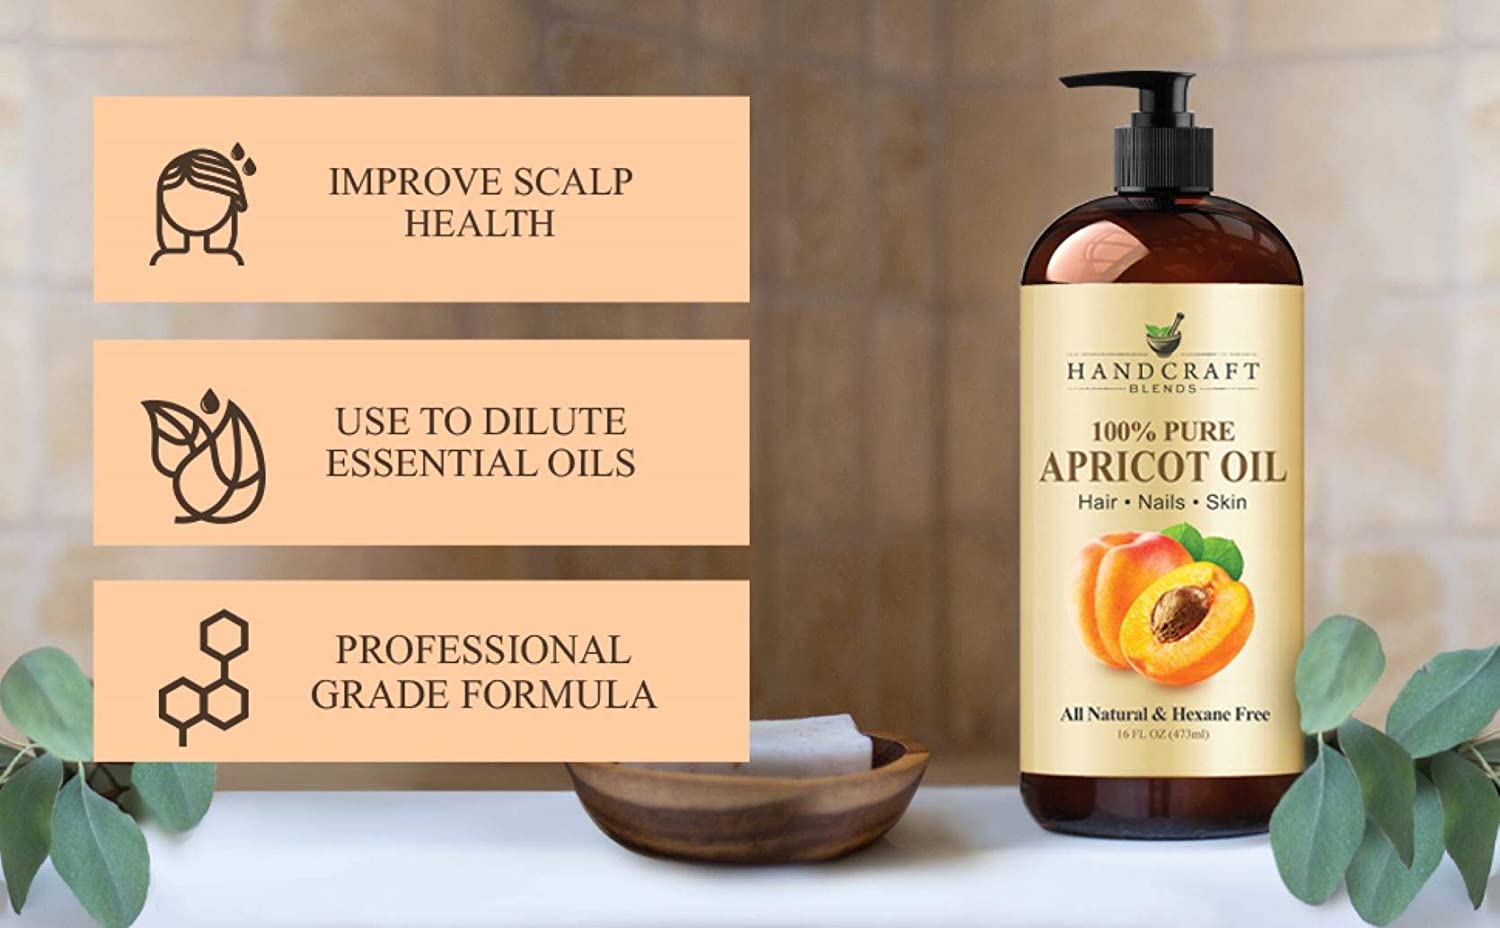 What Is Apricot Kernel Oil? - The Coconut Mama